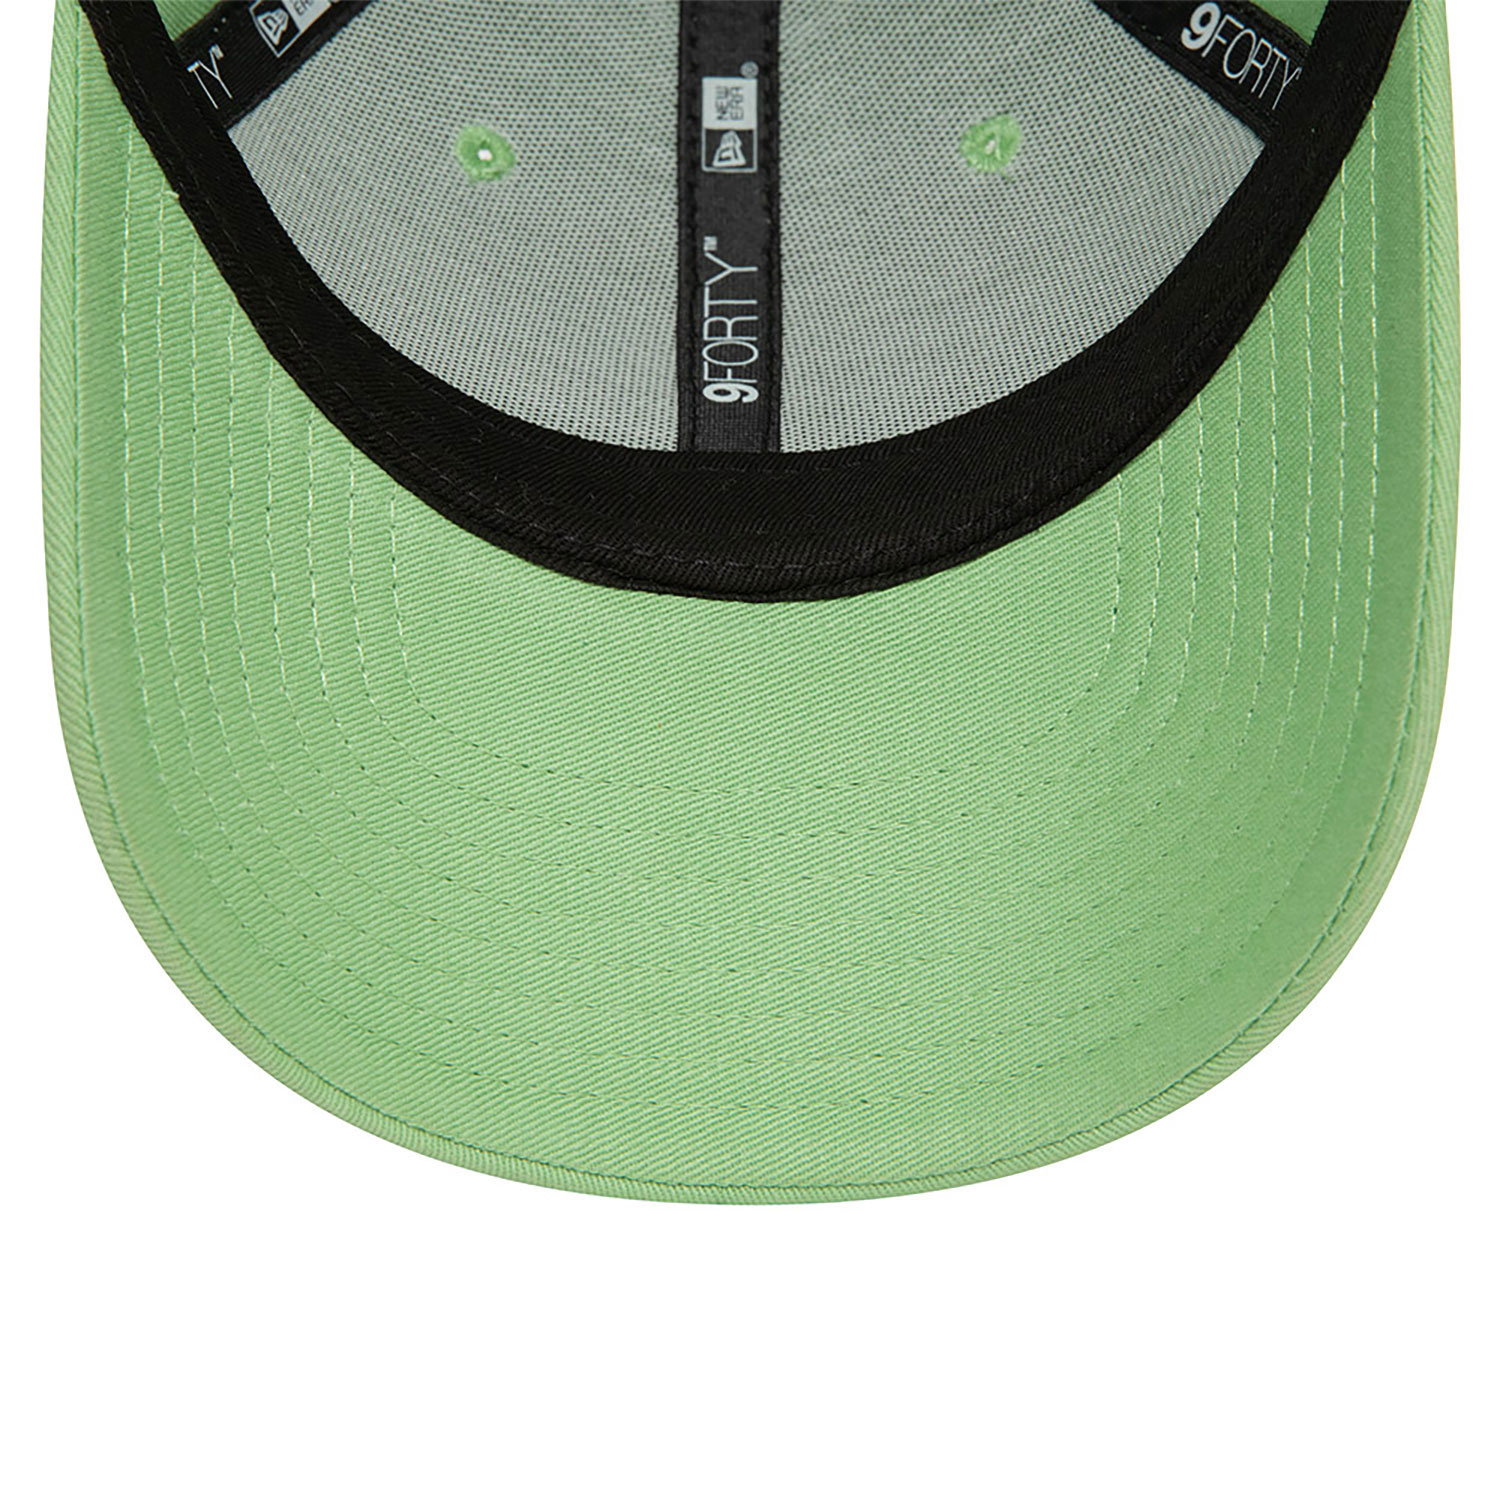 New Era Youth Essential Bright Green 9FORTY Adjustable Cap